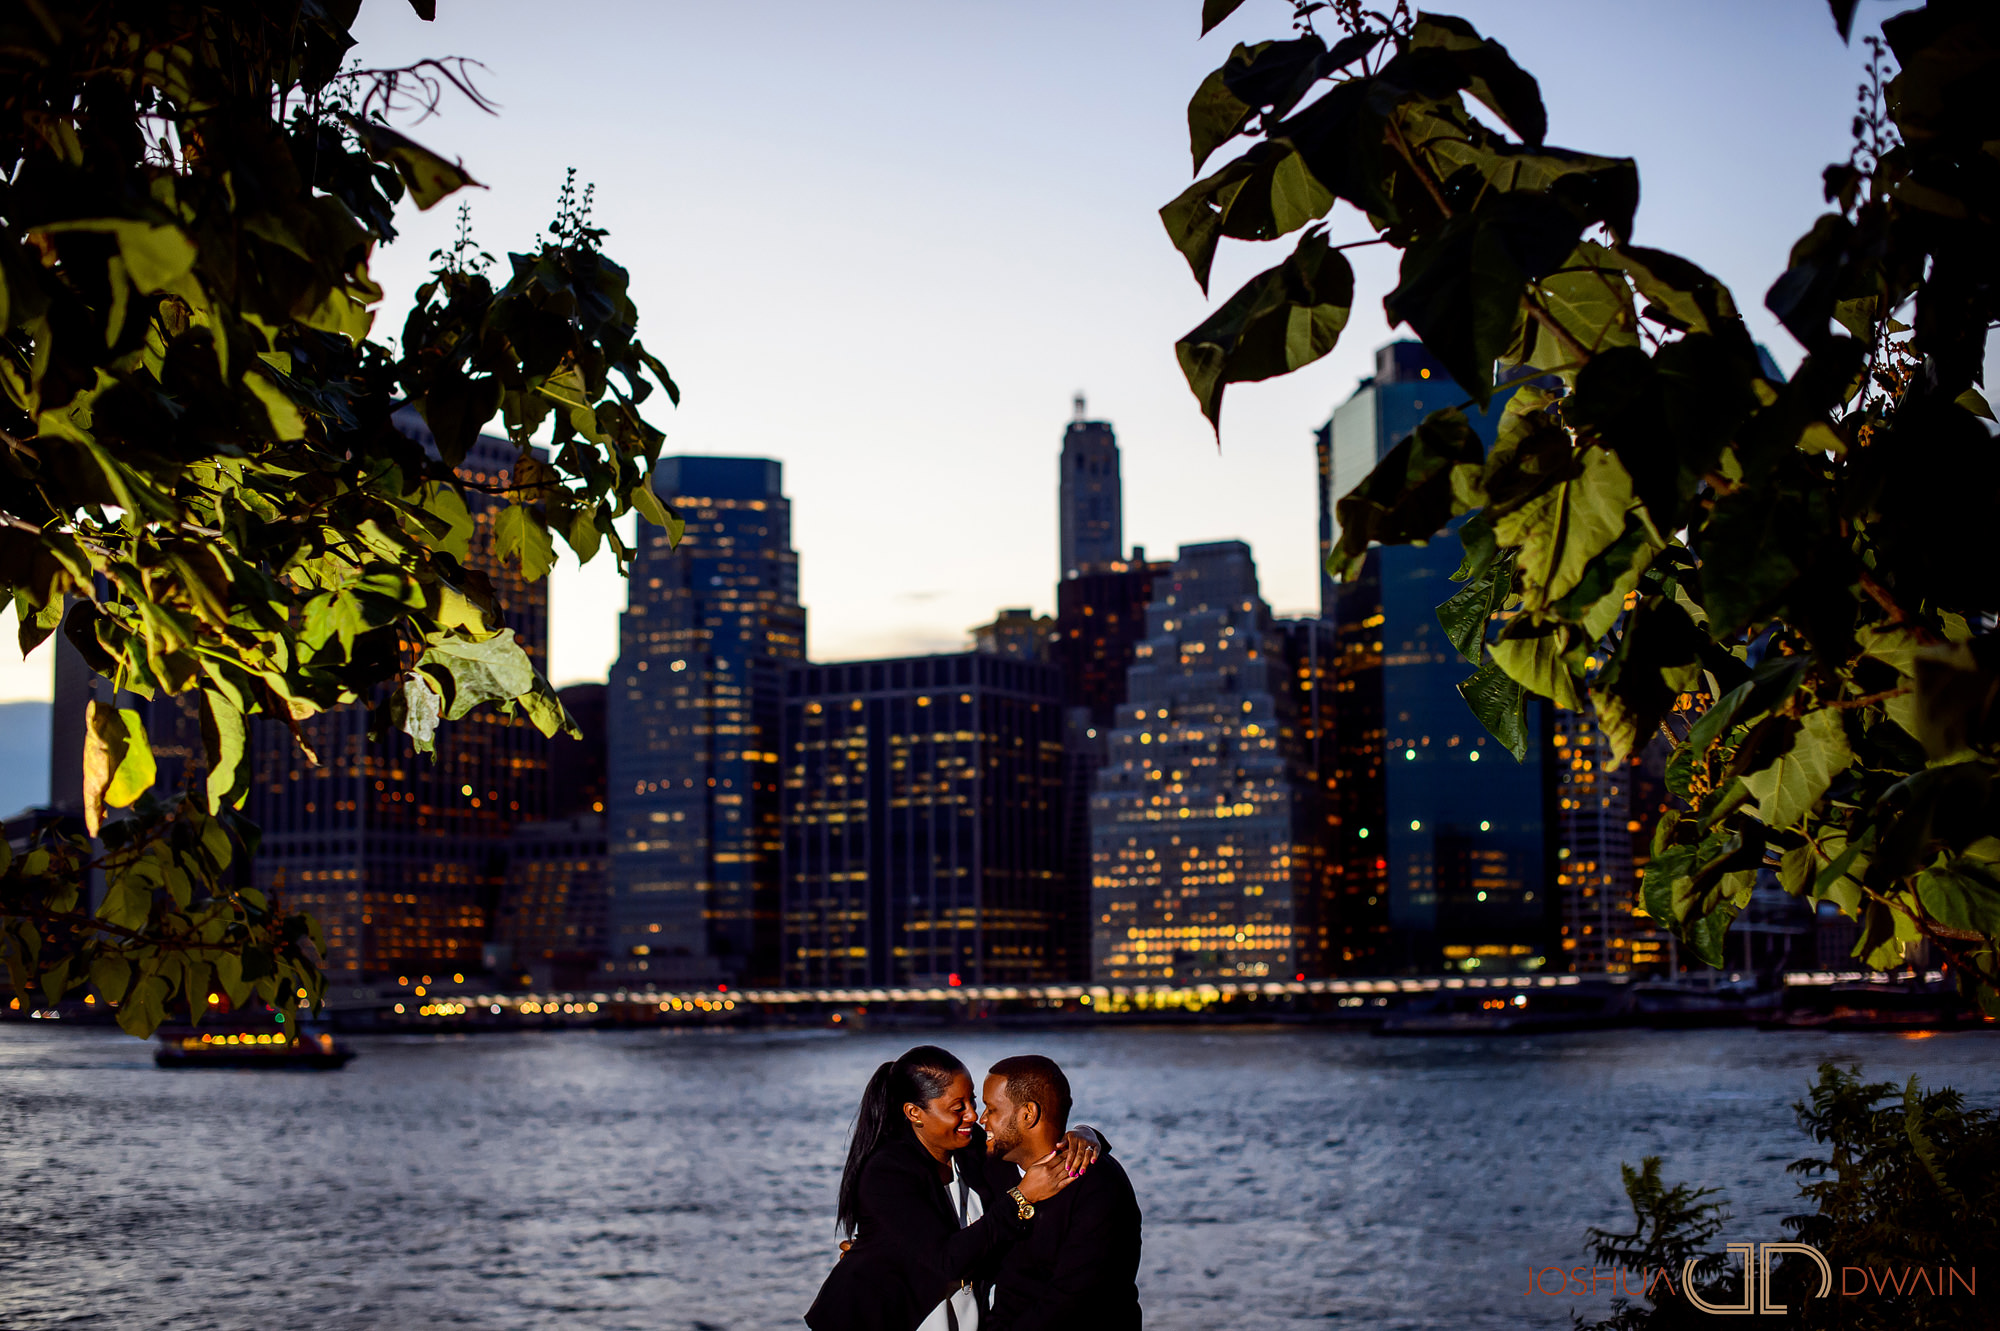 Colleen & Shannon's Engagement Session in Brooklyn Bridge Park, NY